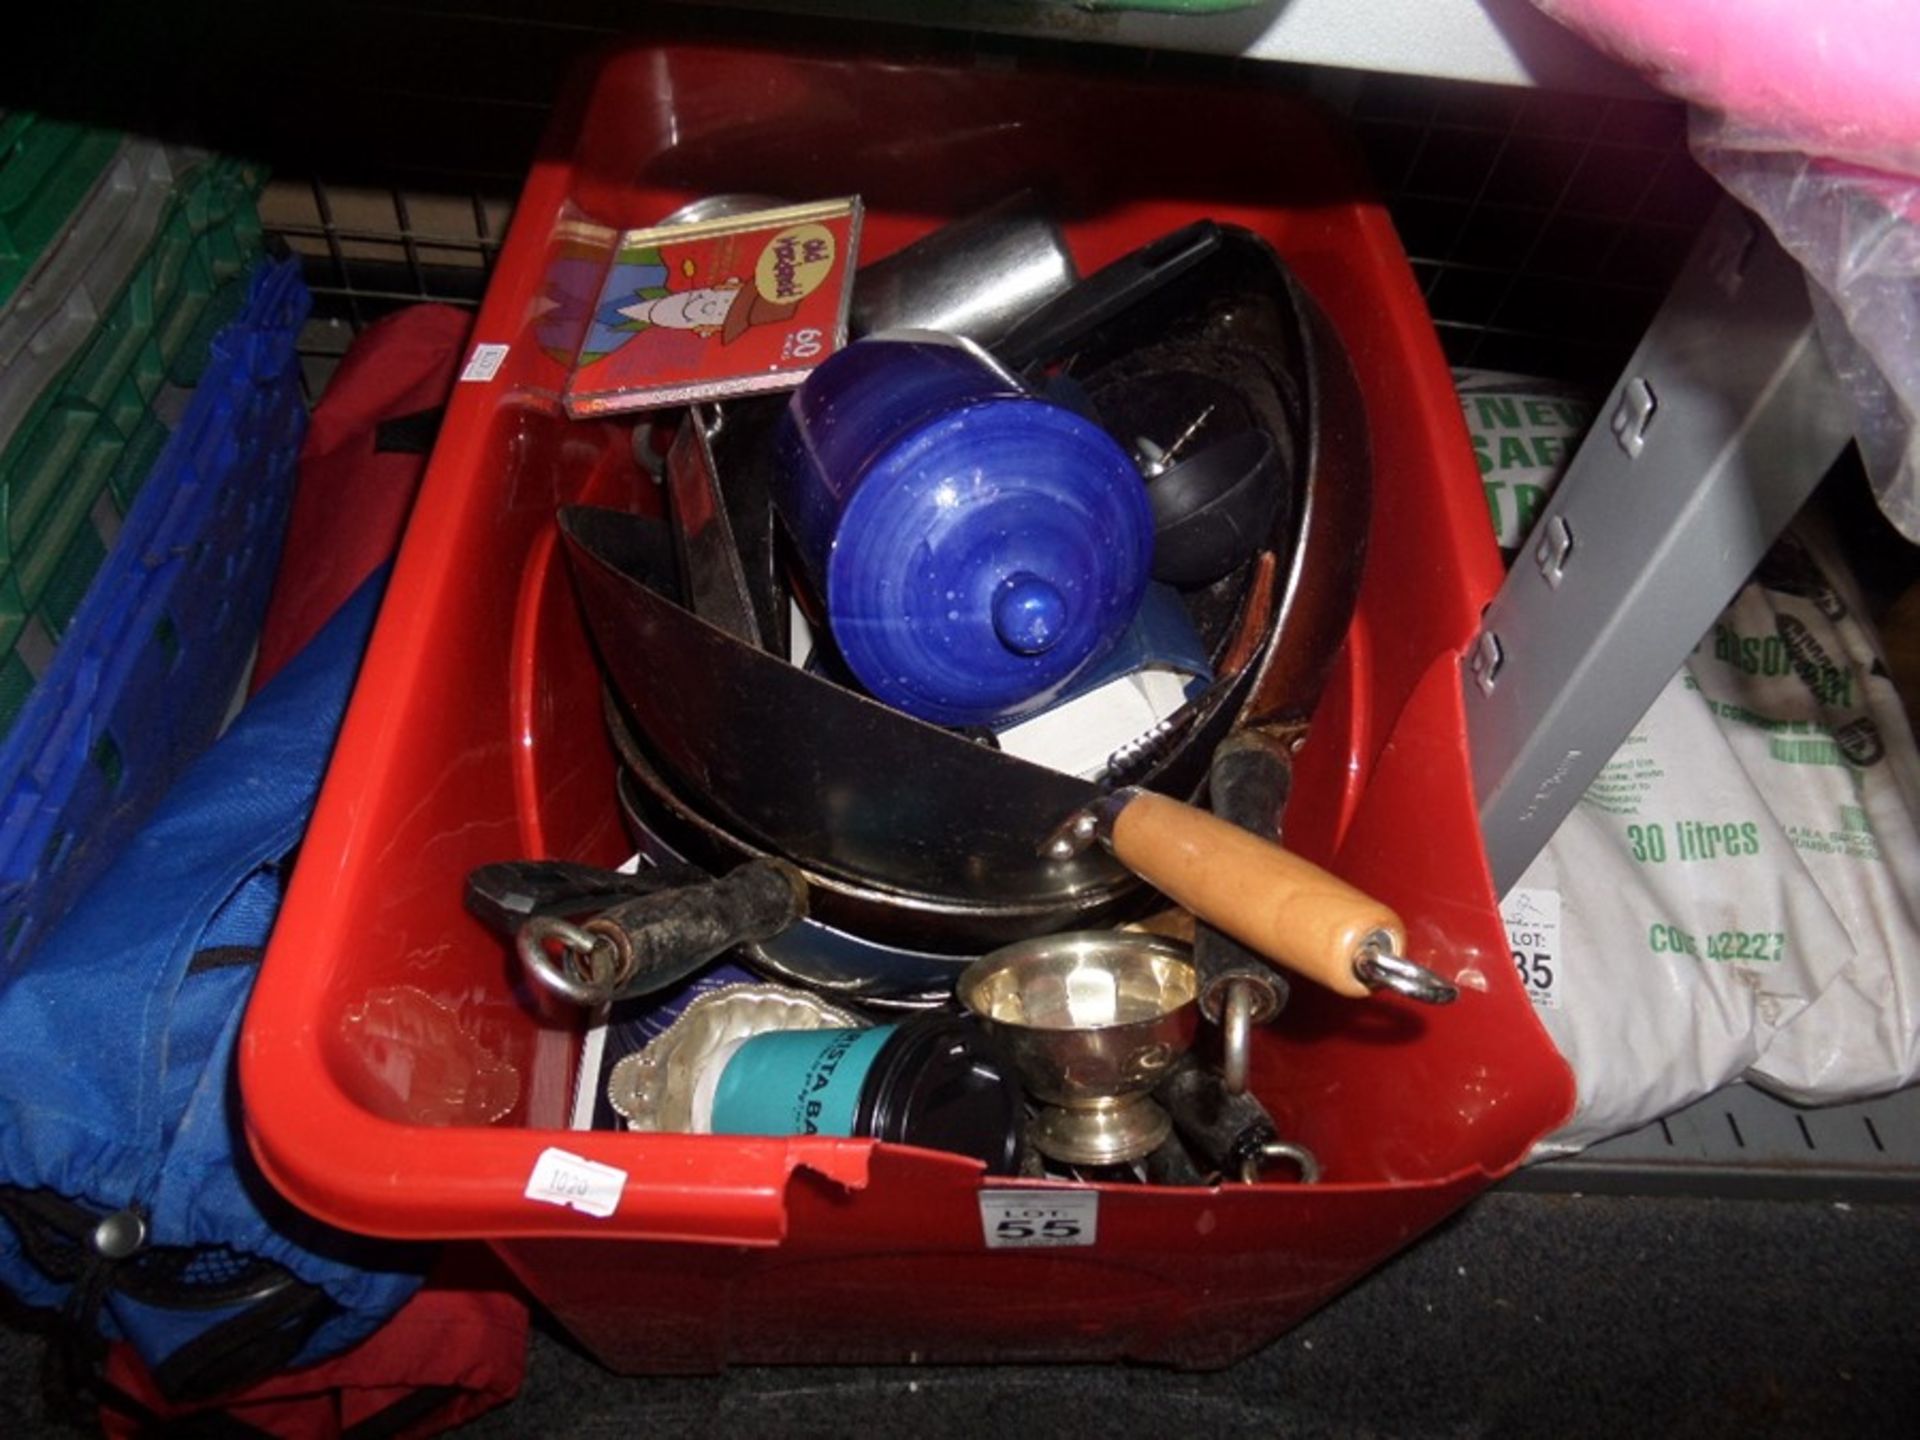 TUB OF KITCHEN CONTENTS